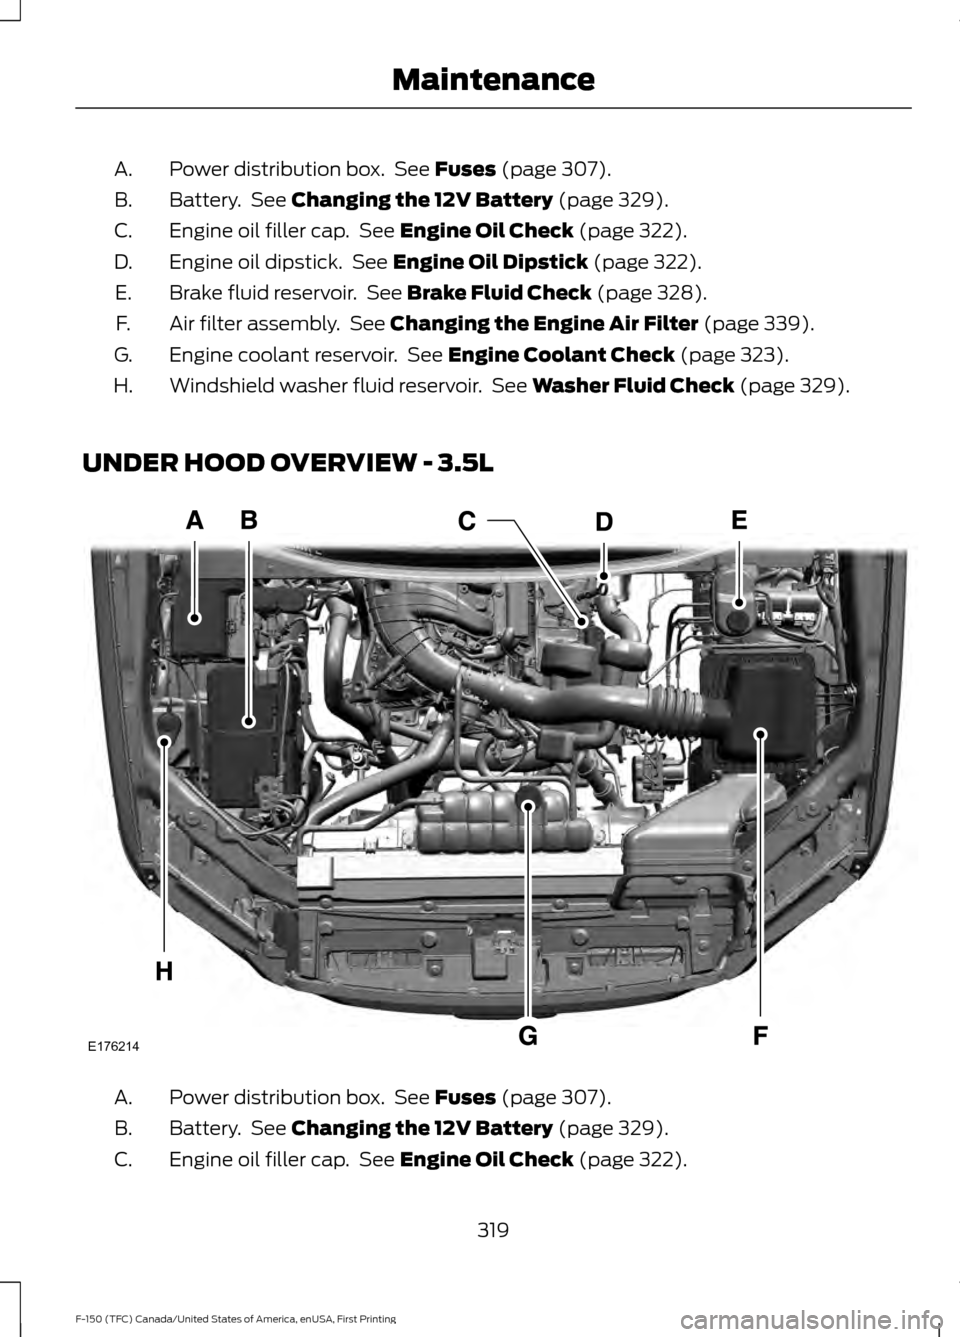 FORD F150 2017 13.G Owners Manual Power distribution box.  See Fuses (page 307).
A.
Battery.  See 
Changing the 12V Battery (page 329).
B.
Engine oil filler cap.  See 
Engine Oil Check (page 322).
C.
Engine oil dipstick.  See 
Engine 